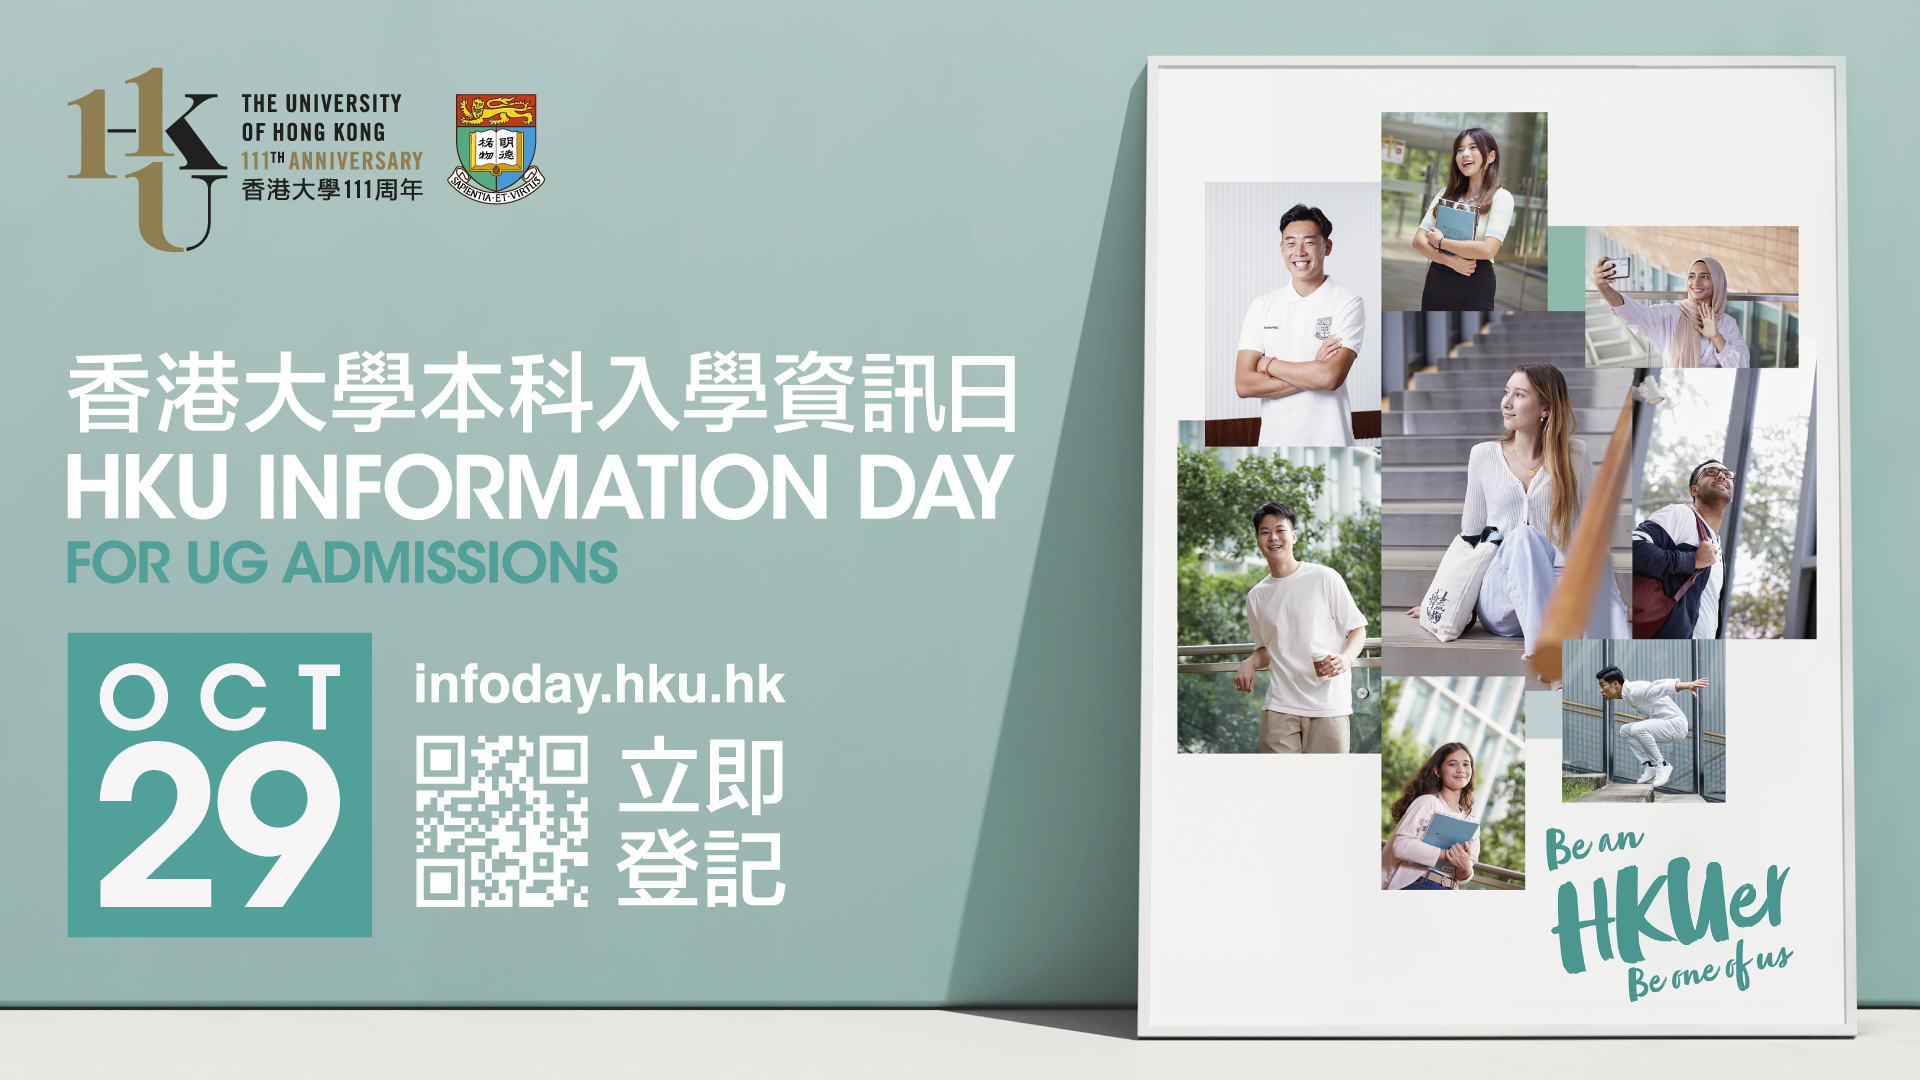 Information Day 2022 visual with date